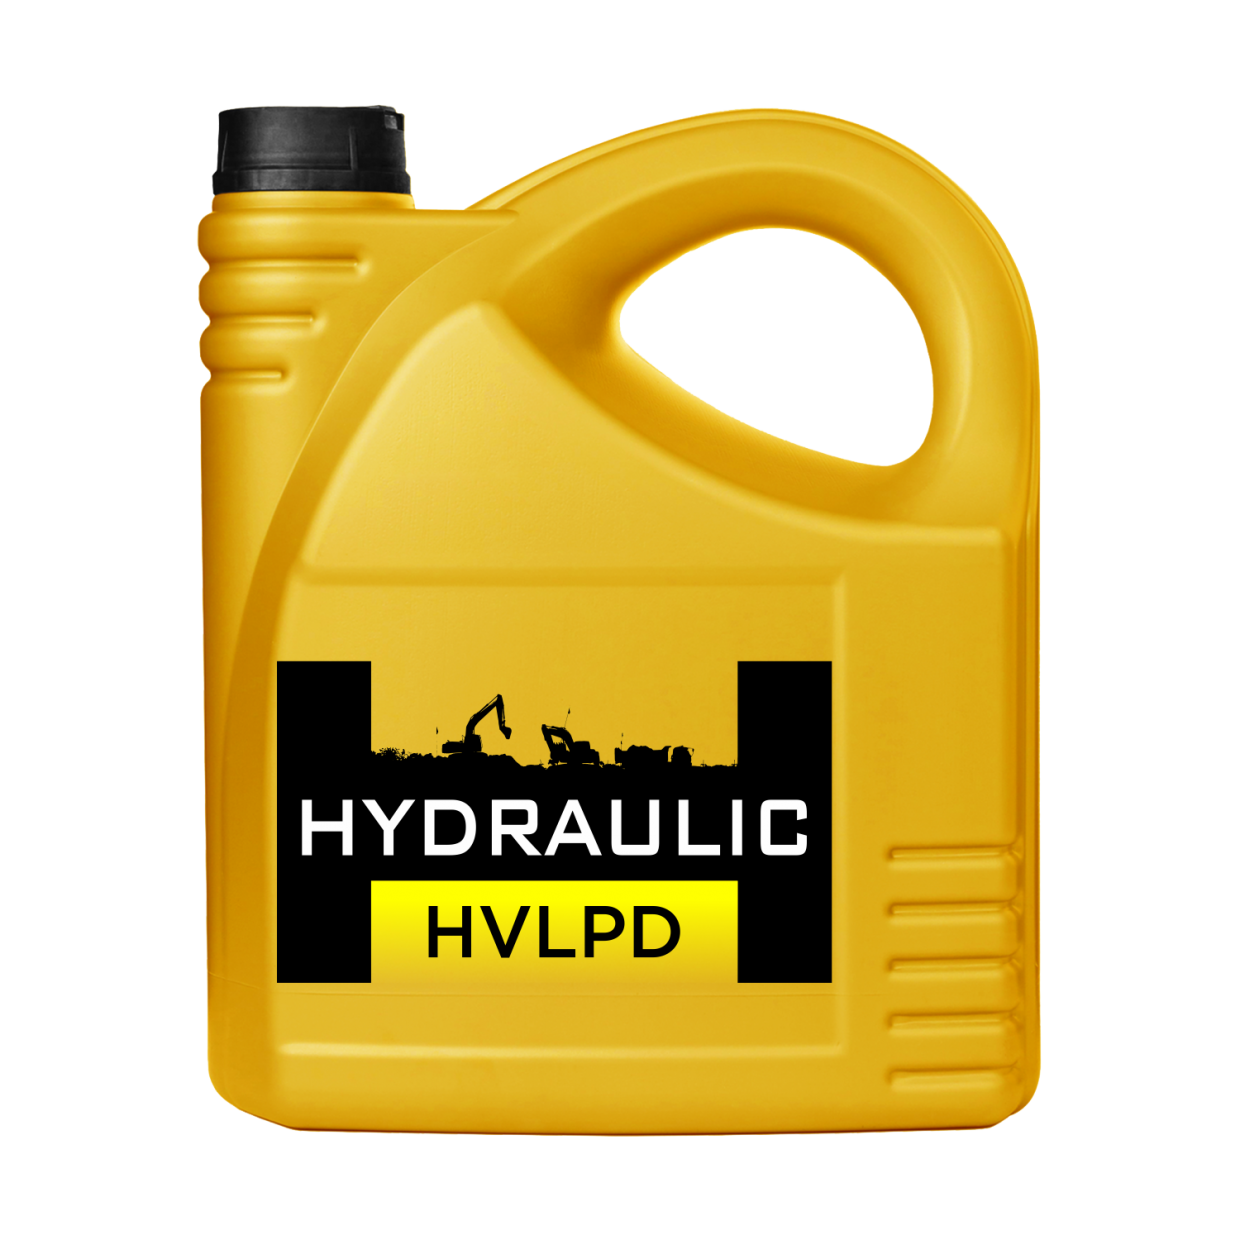 Масло Hydraulic 46. HLP 46 масло гидравлическое. Масло гидравлическое HVLP 46. Гидравлическое масло 8